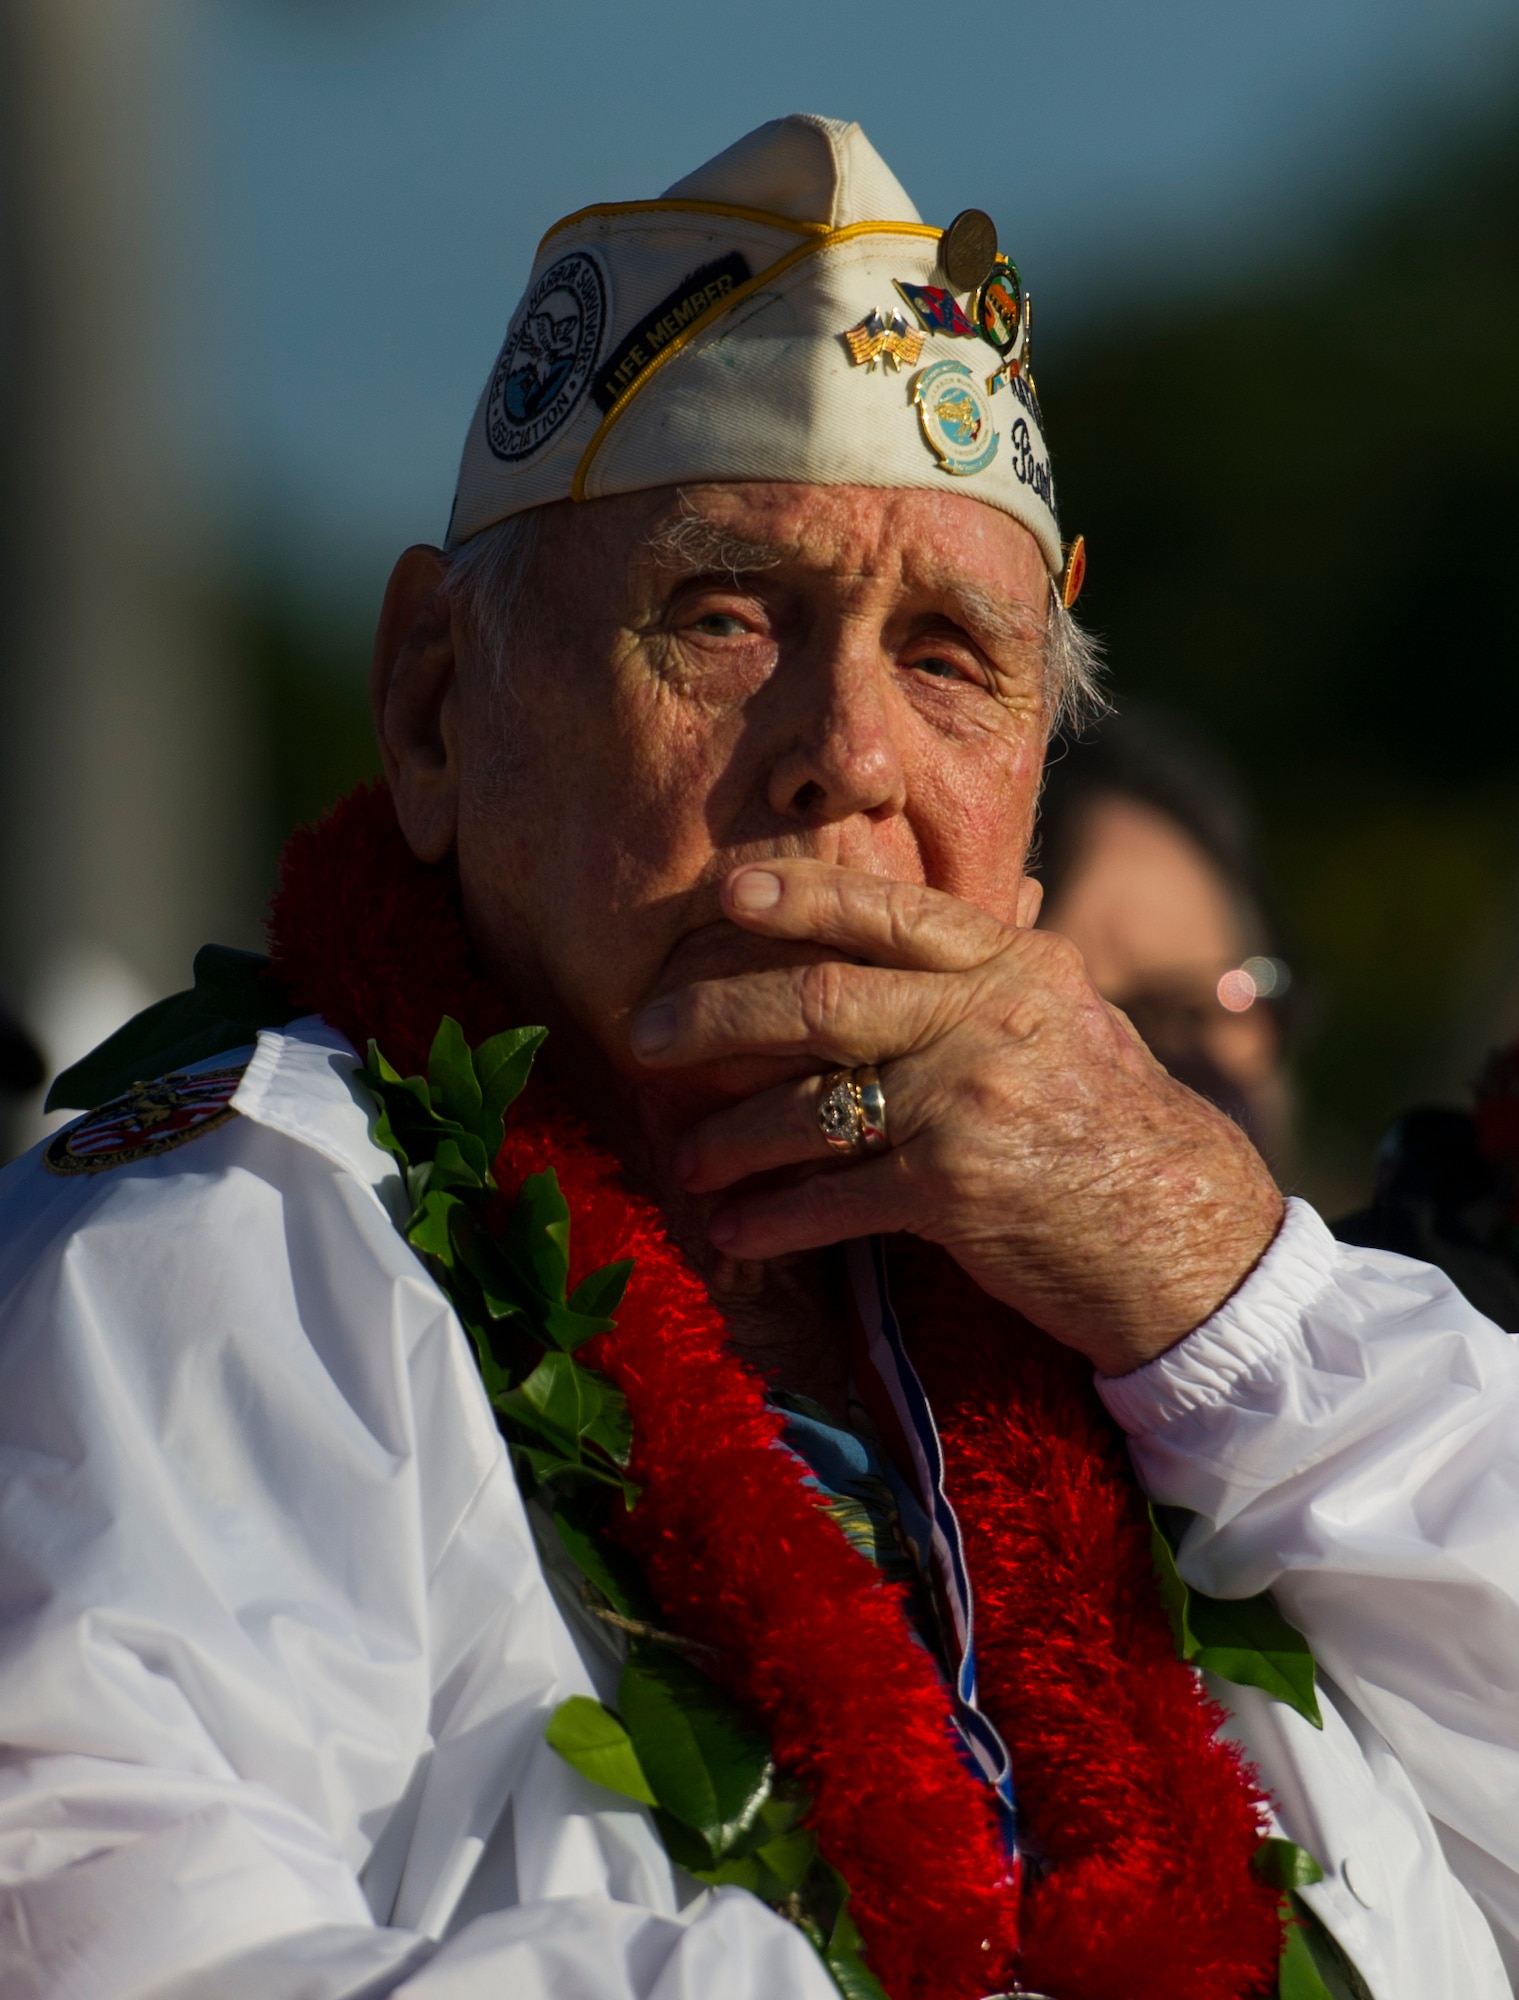 Former U.S. Air Force Staff Sgt. Durward Swanson reflects during the 75th Commemoration of the Dec. 7, 1941 attack on Hickam Field ceremony Dec. 7, 2016, at Joint Base Pearl Harbor-Hickam, Hawaii. Swanson was assigned to Hickam Field as a security forces guard. After the attack, he served as a B-17 Flying Fortress crew chief. During the Battle of Midway, his aircraft was hit and crash-landed in the water. Seven of the 10-man crew were killed. Swanson received severe injuries and spent nine months in the hospital. He received the Distinguished Flying Cross, a Purple Heart, and an honorable discharge. (U.S. Air Force photo by Tech. Sgt. Nathan Allen)